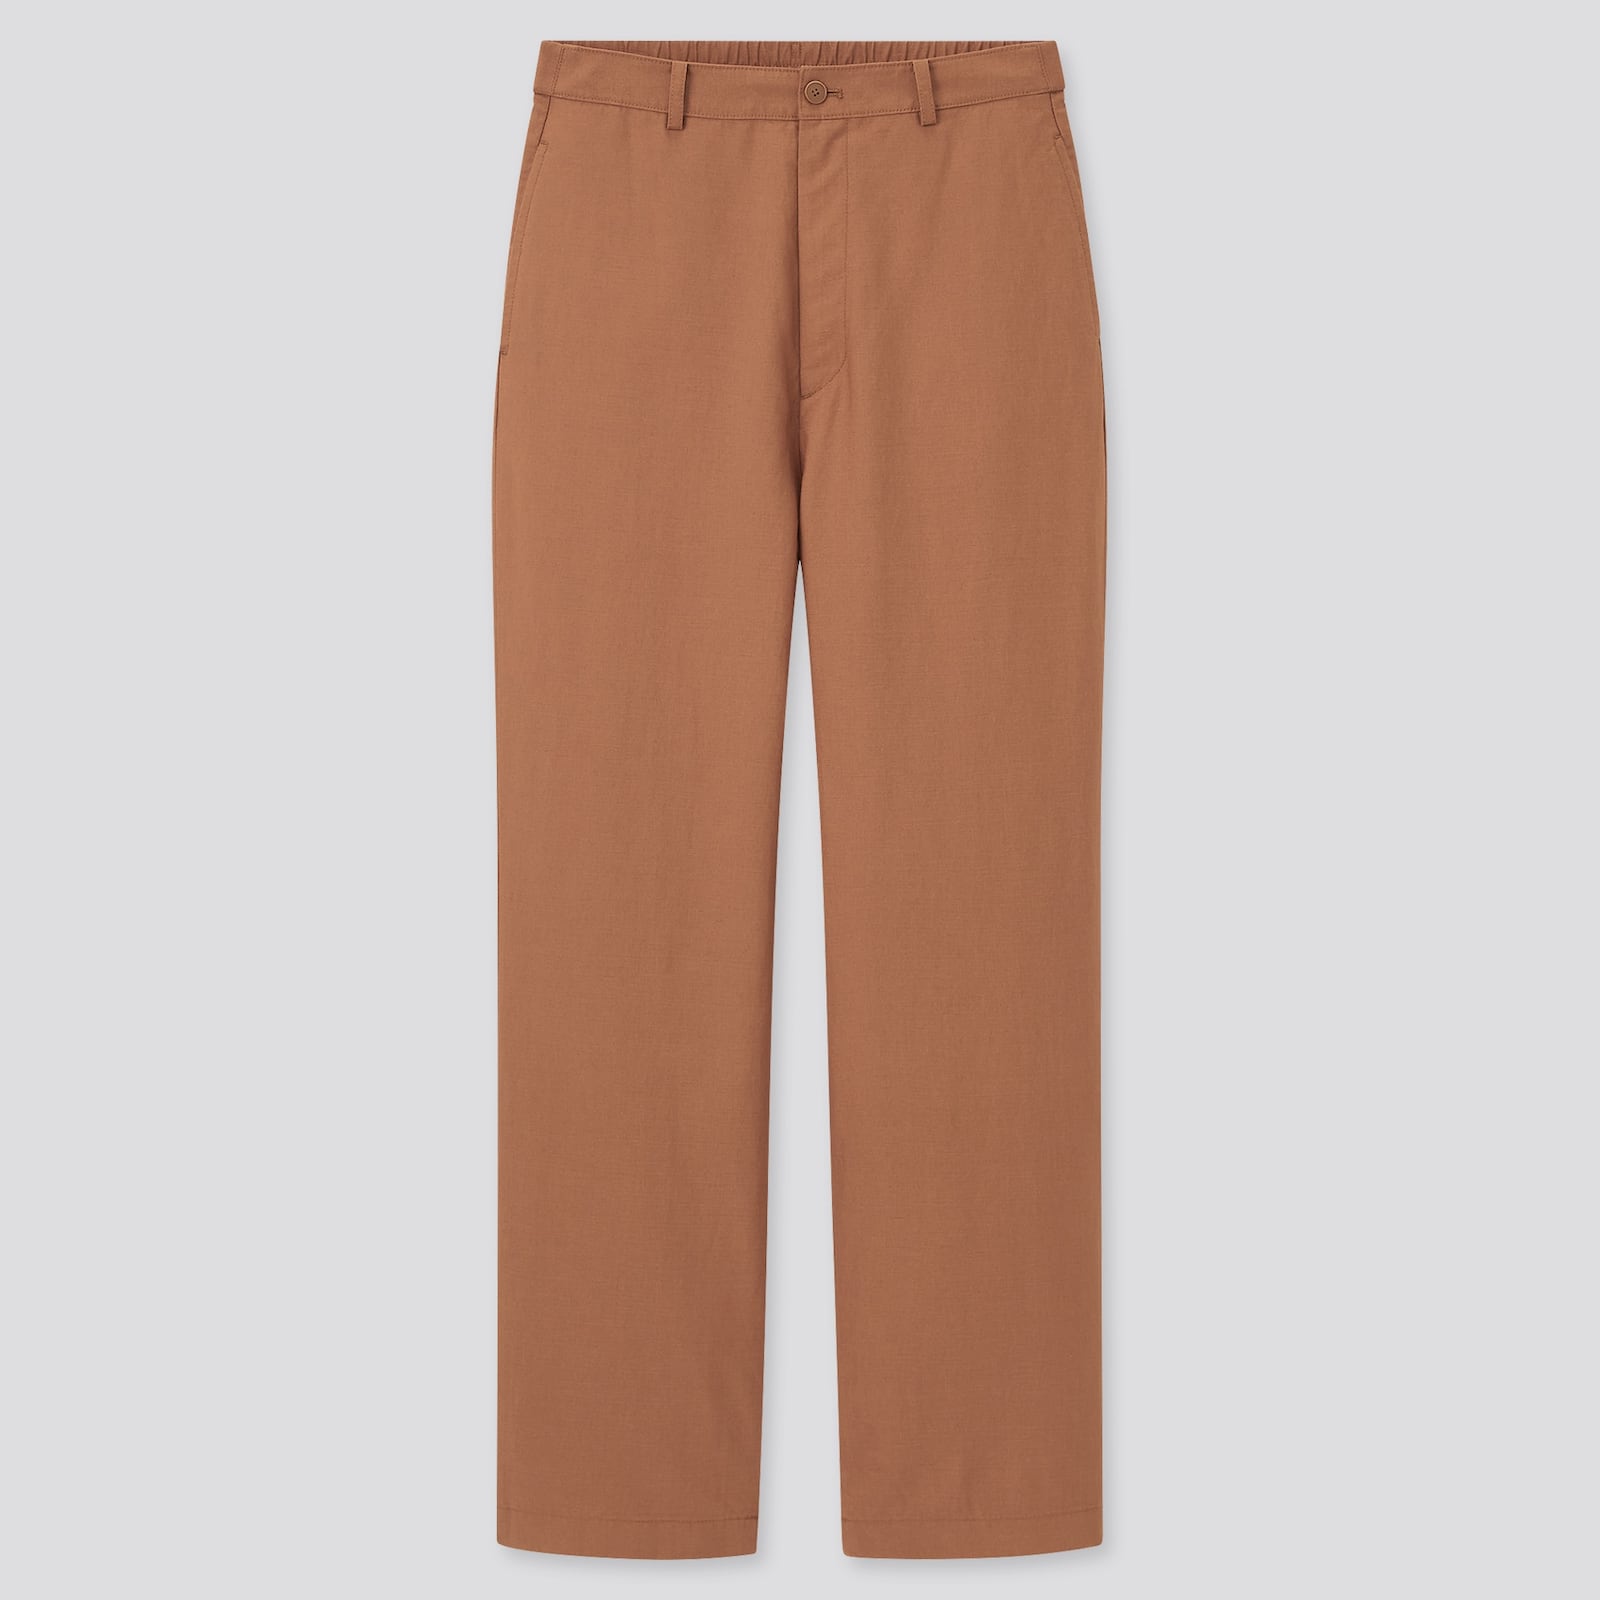 MENS LINEN BLEND RELAXED PANTS  UNIQLO TH